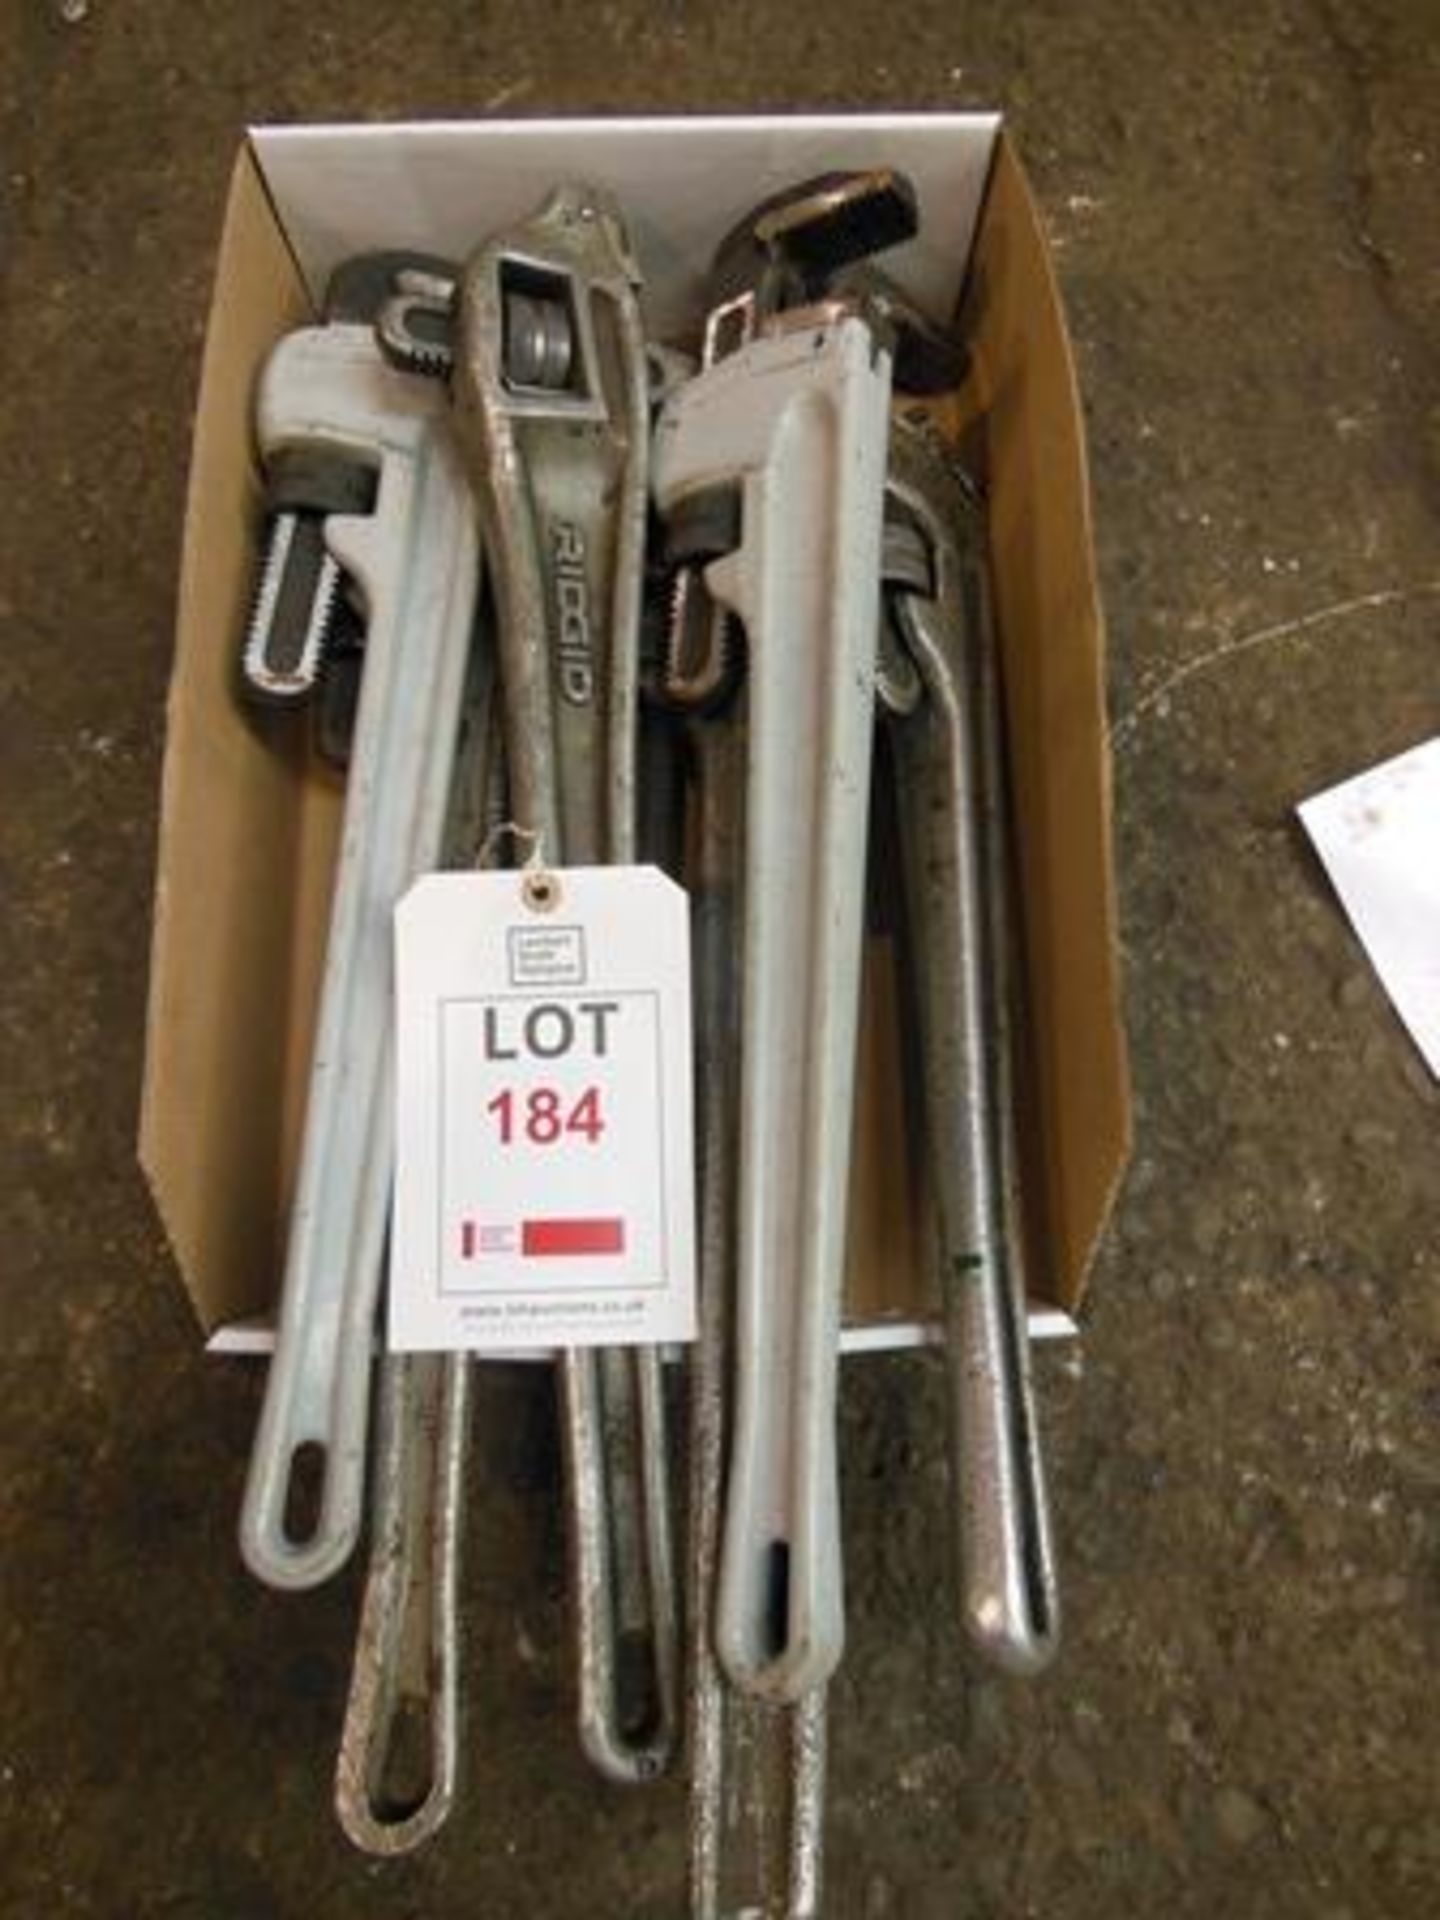 6 heavy duty pipe wrenches